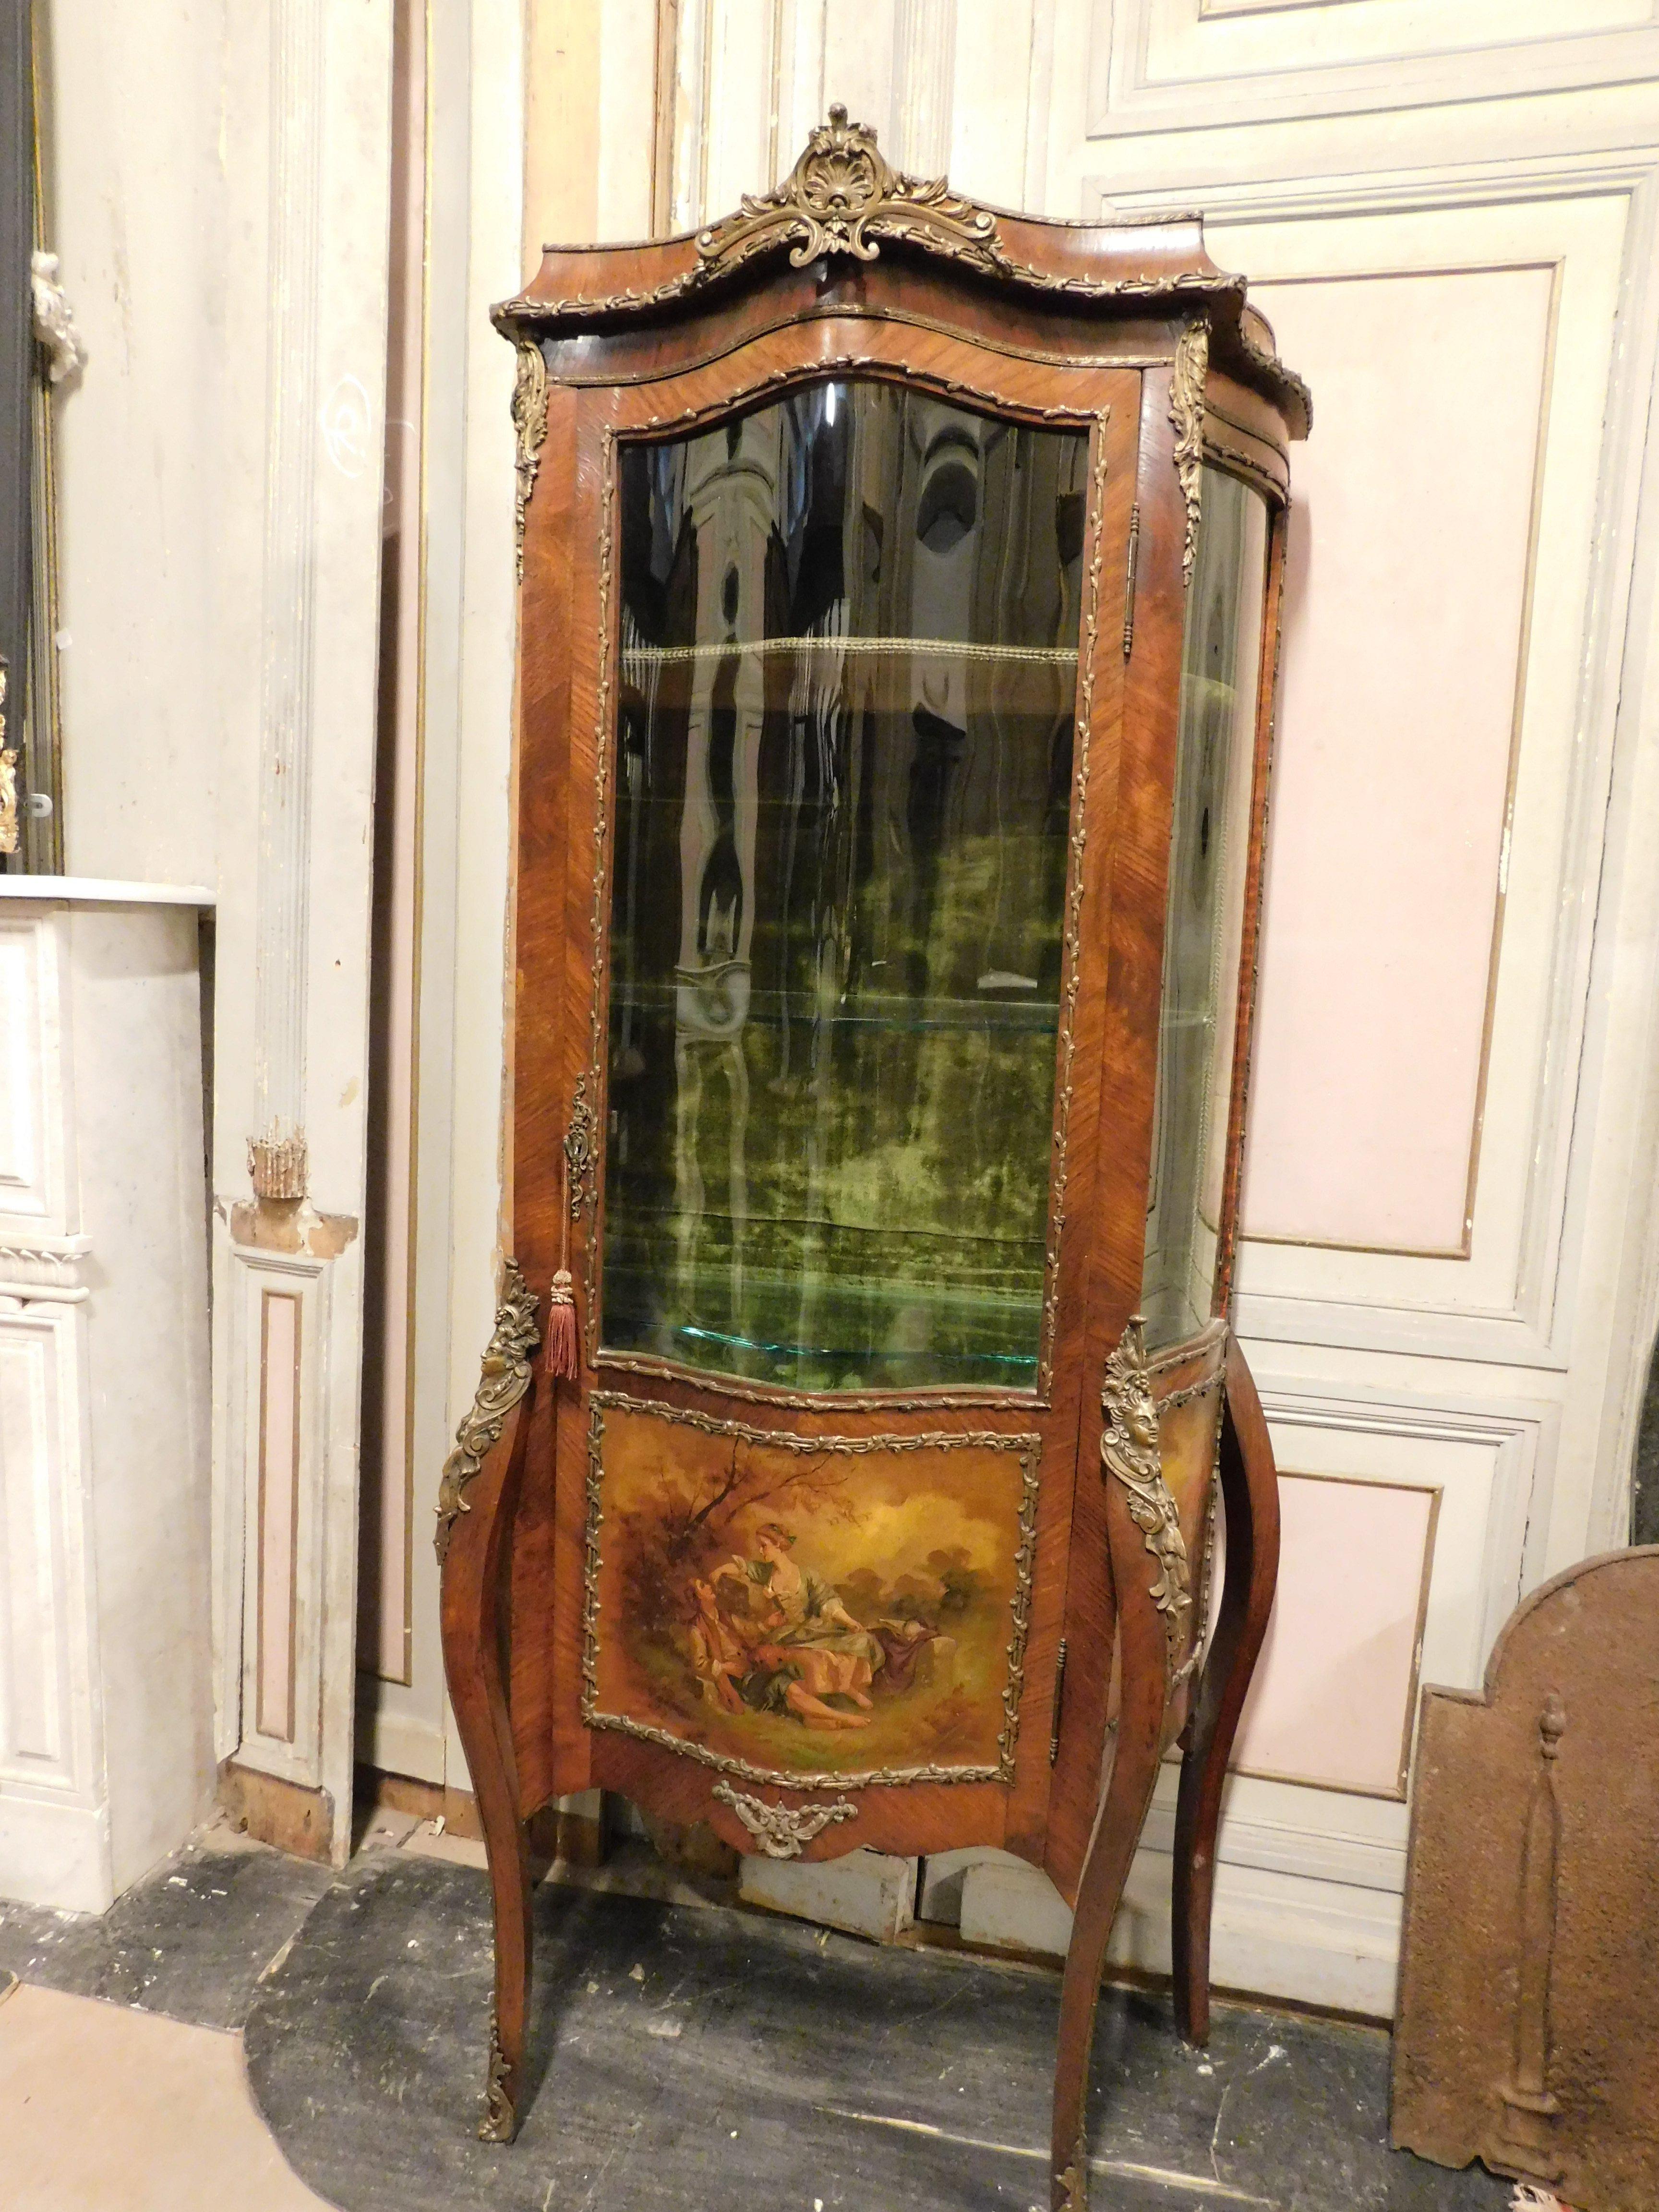 Antique display cabinet with rounded shape, veneered glass, lacquered and hand painted with gallant scenes in the panels, produced in France in the late 19th century, cabinet embellished with gilded bronze decorations and interior in green fabric